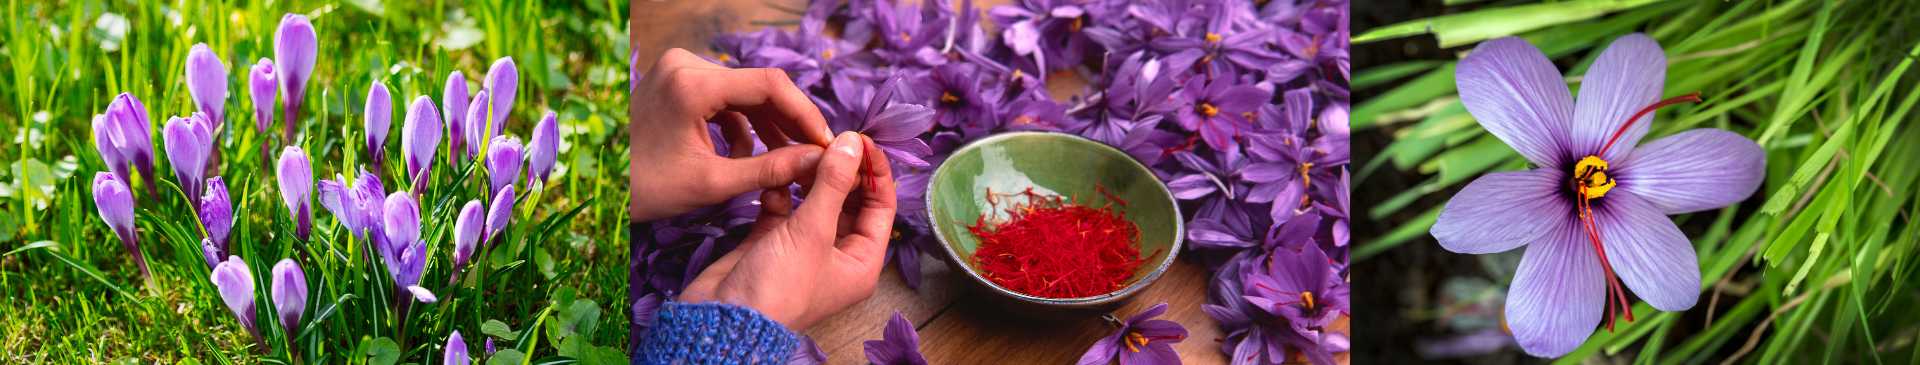 How to Grow and Harvest Saffron